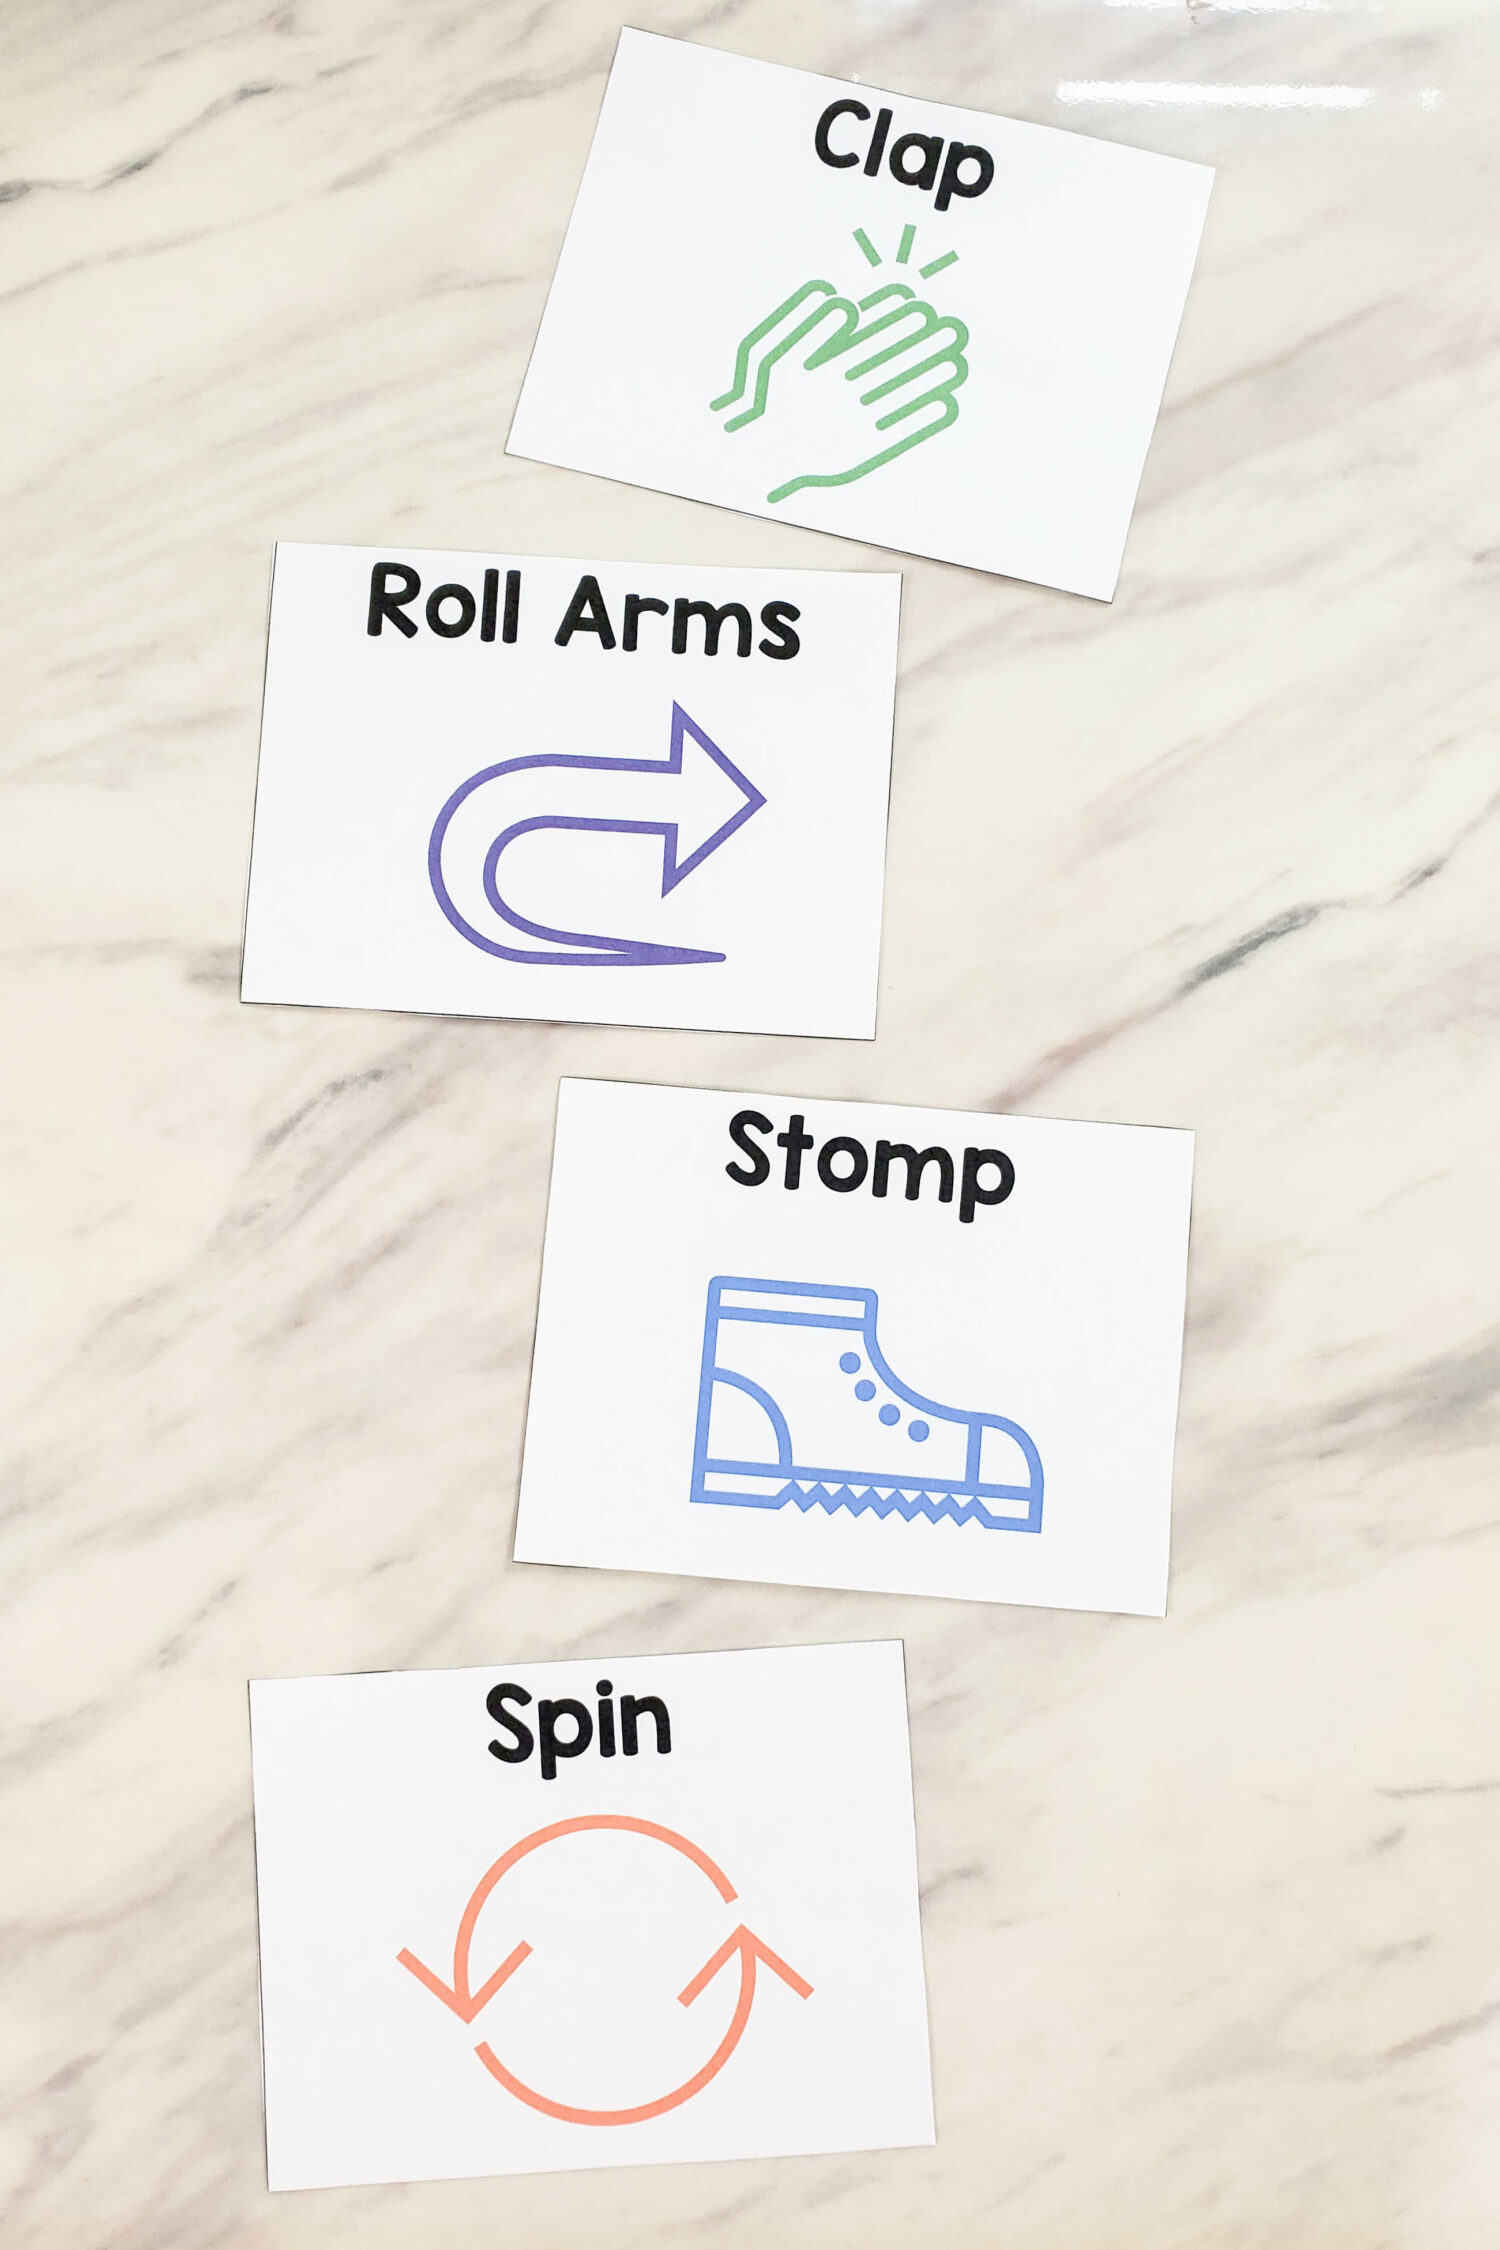 Children All Over the World Body Rhythm singing time idea! Use this pattern with claps, stomps, and rolling your arms that follows along with the lyrics to add purposeful movement! Includes printable song helps for LDS Primary Music Leaders teaching this song.